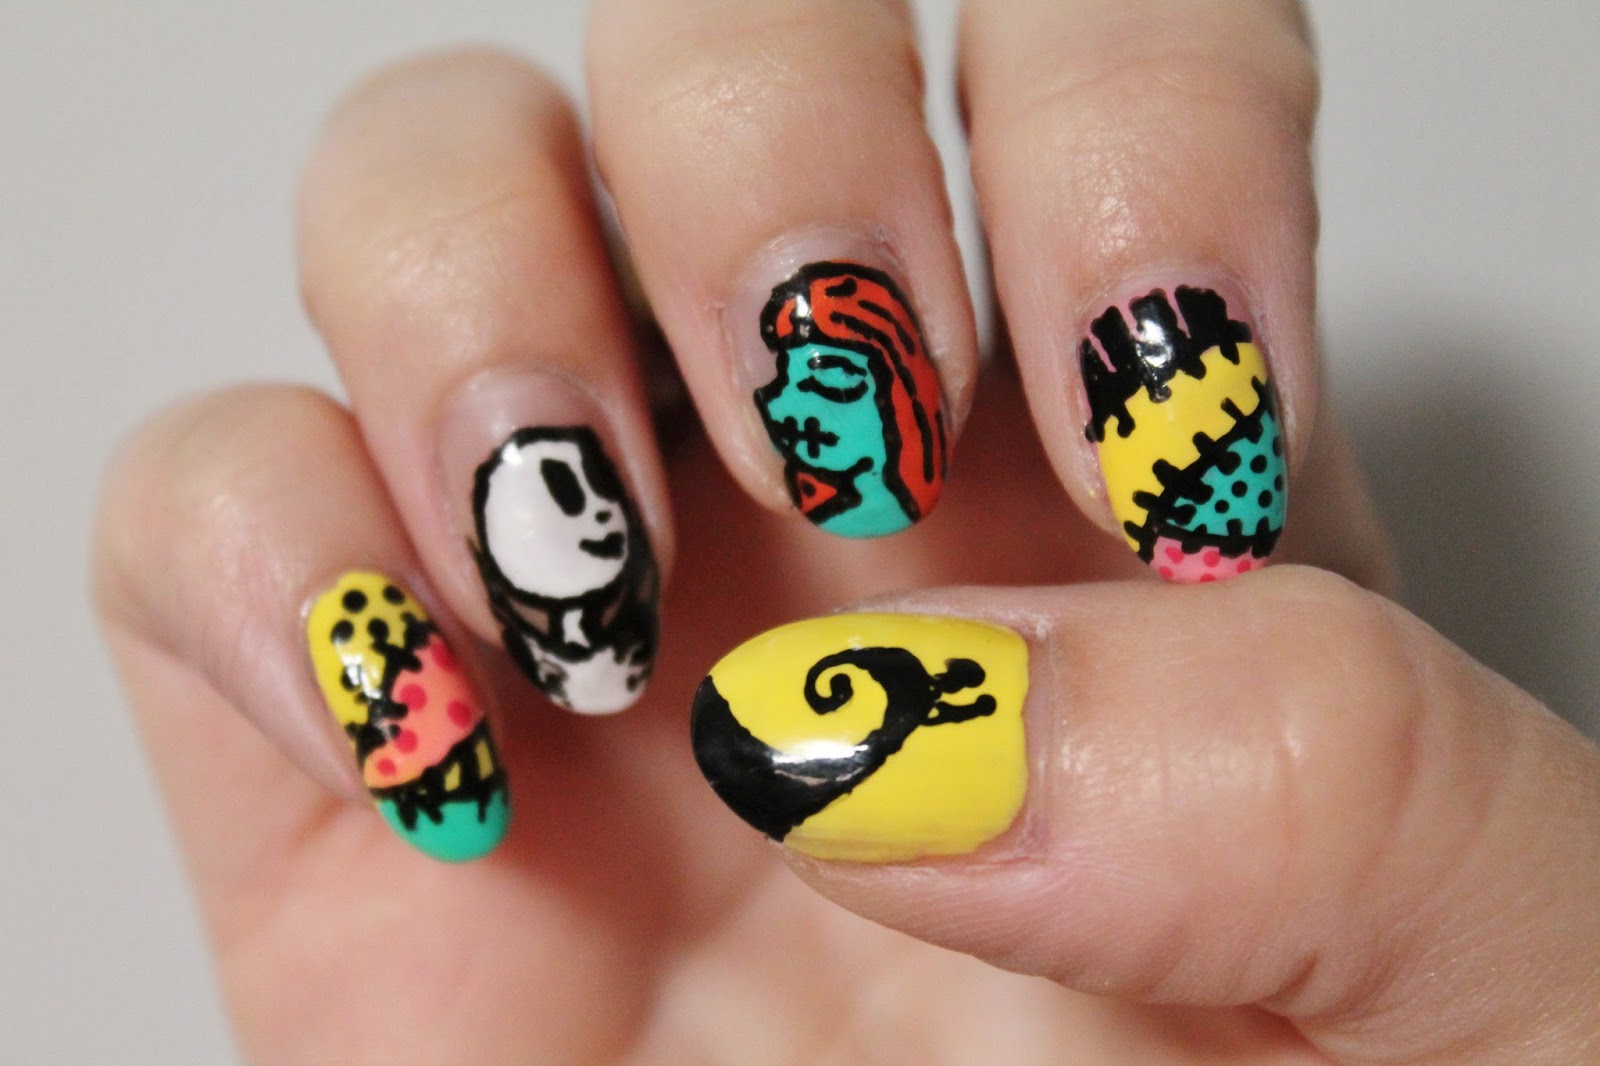 4. Haunted House Nails - wide 7